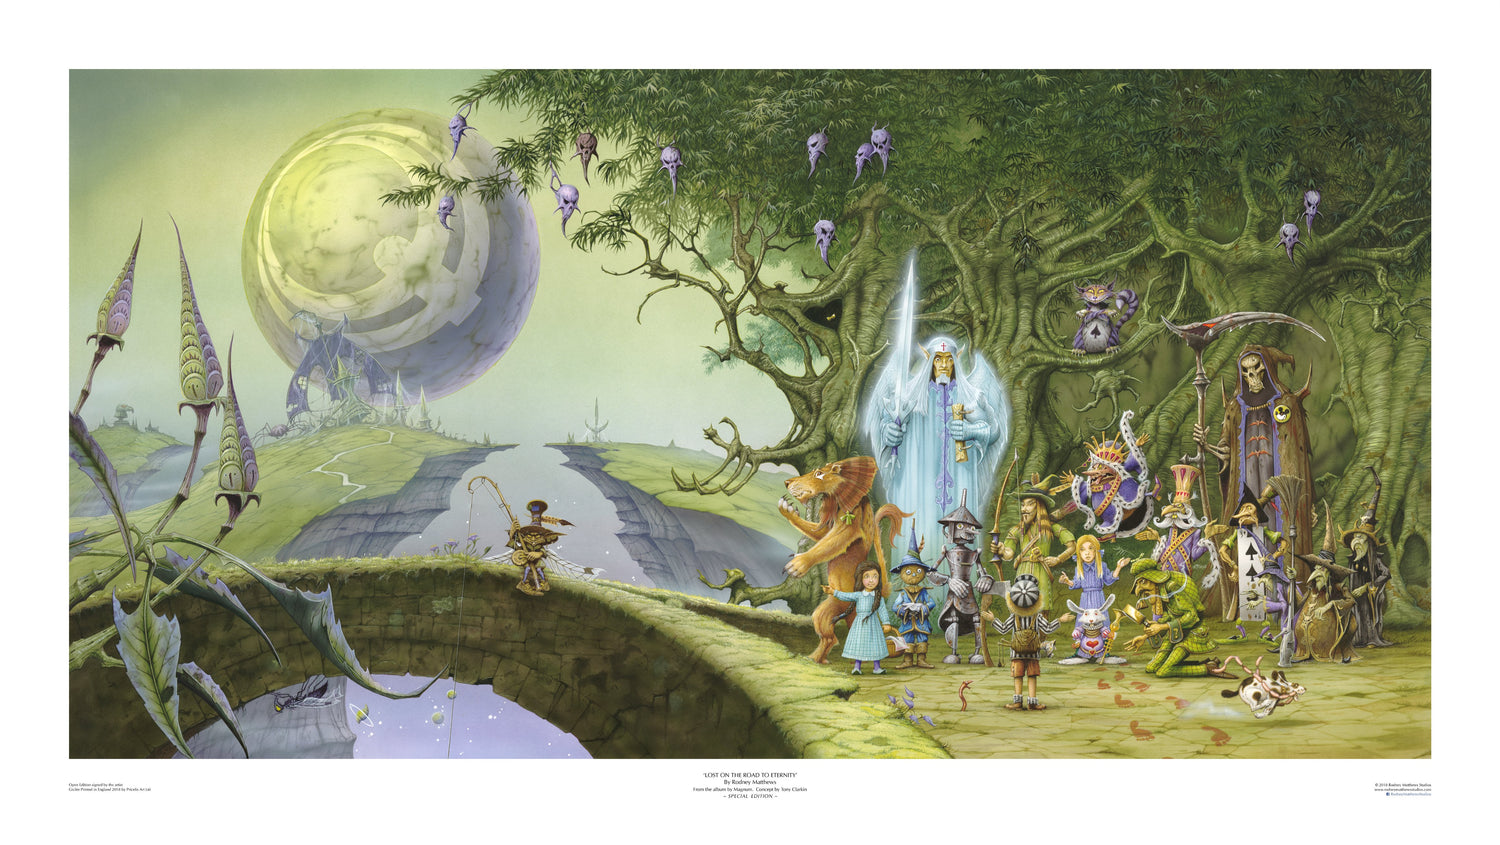 Lost on the Road to Eternity (Magnum) SPECIAL open edition print, hand-signed by Rodney Matthews